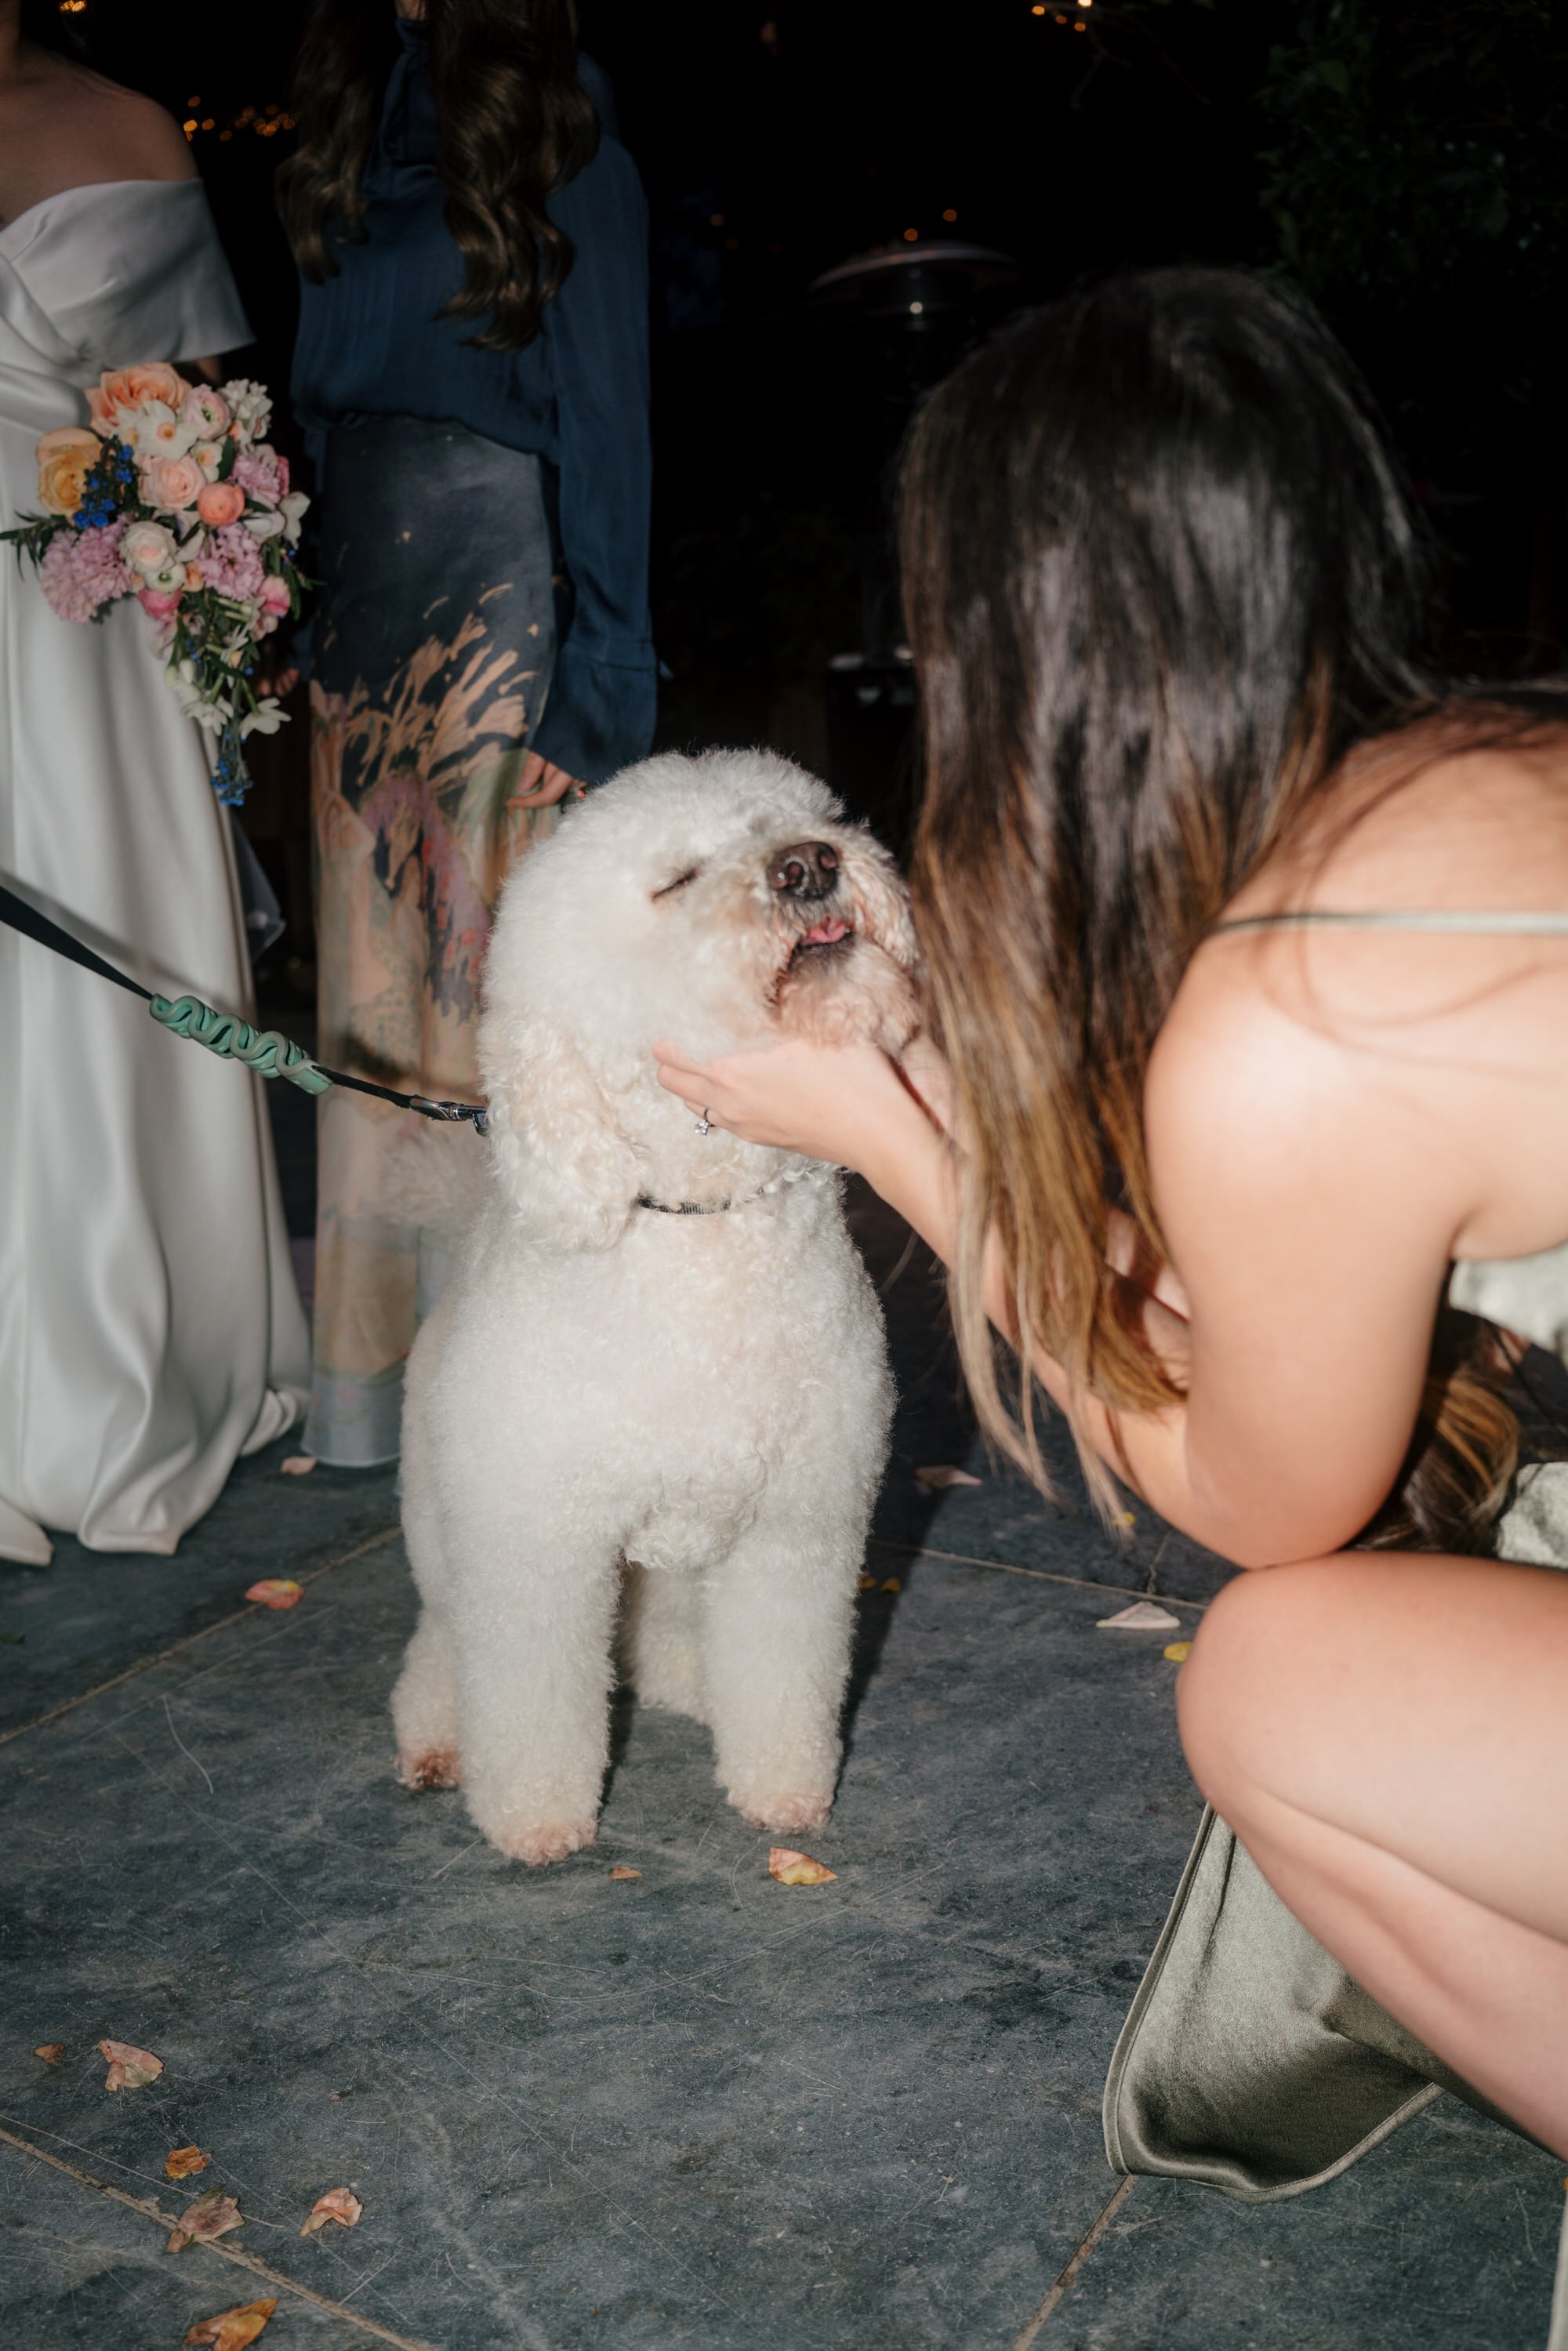 glasshouse-morningside-top-auckland-wedding-phtographer-2023-photography-videography-film-new-zealand-NZ-best-urban-venue-traditional-chinese-ceremony-spring-colourful-pet-dog-dear-white-production (60).jpg